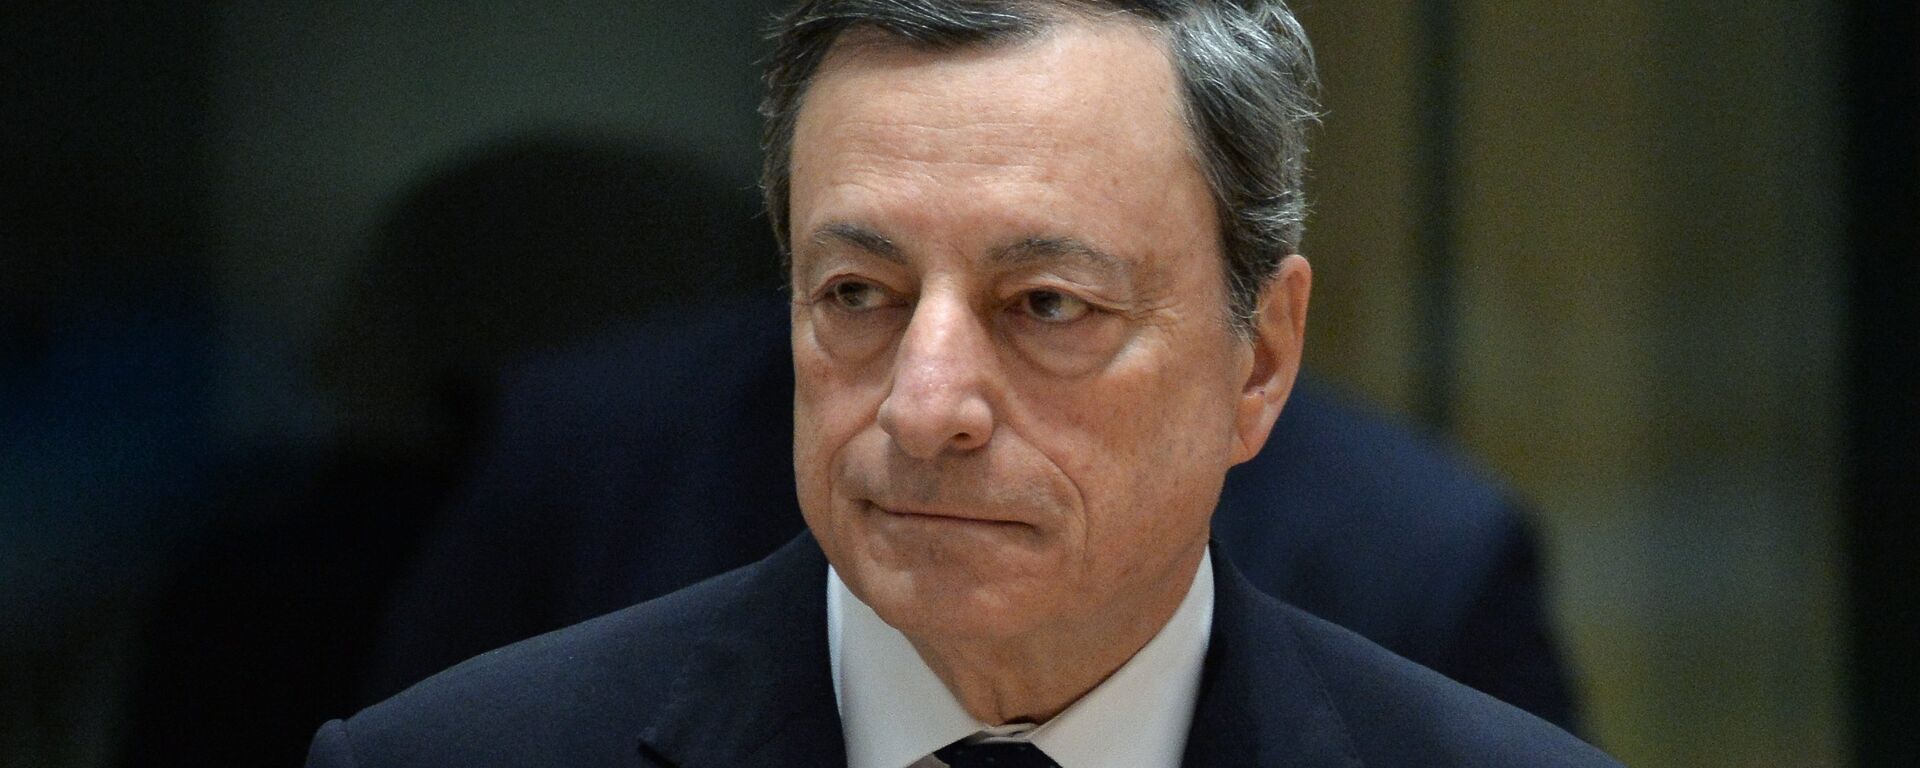 European Central Bank President Mario Draghi is pictured during a EU summit in Brussels - Sputnik International, 1920, 23.07.2022